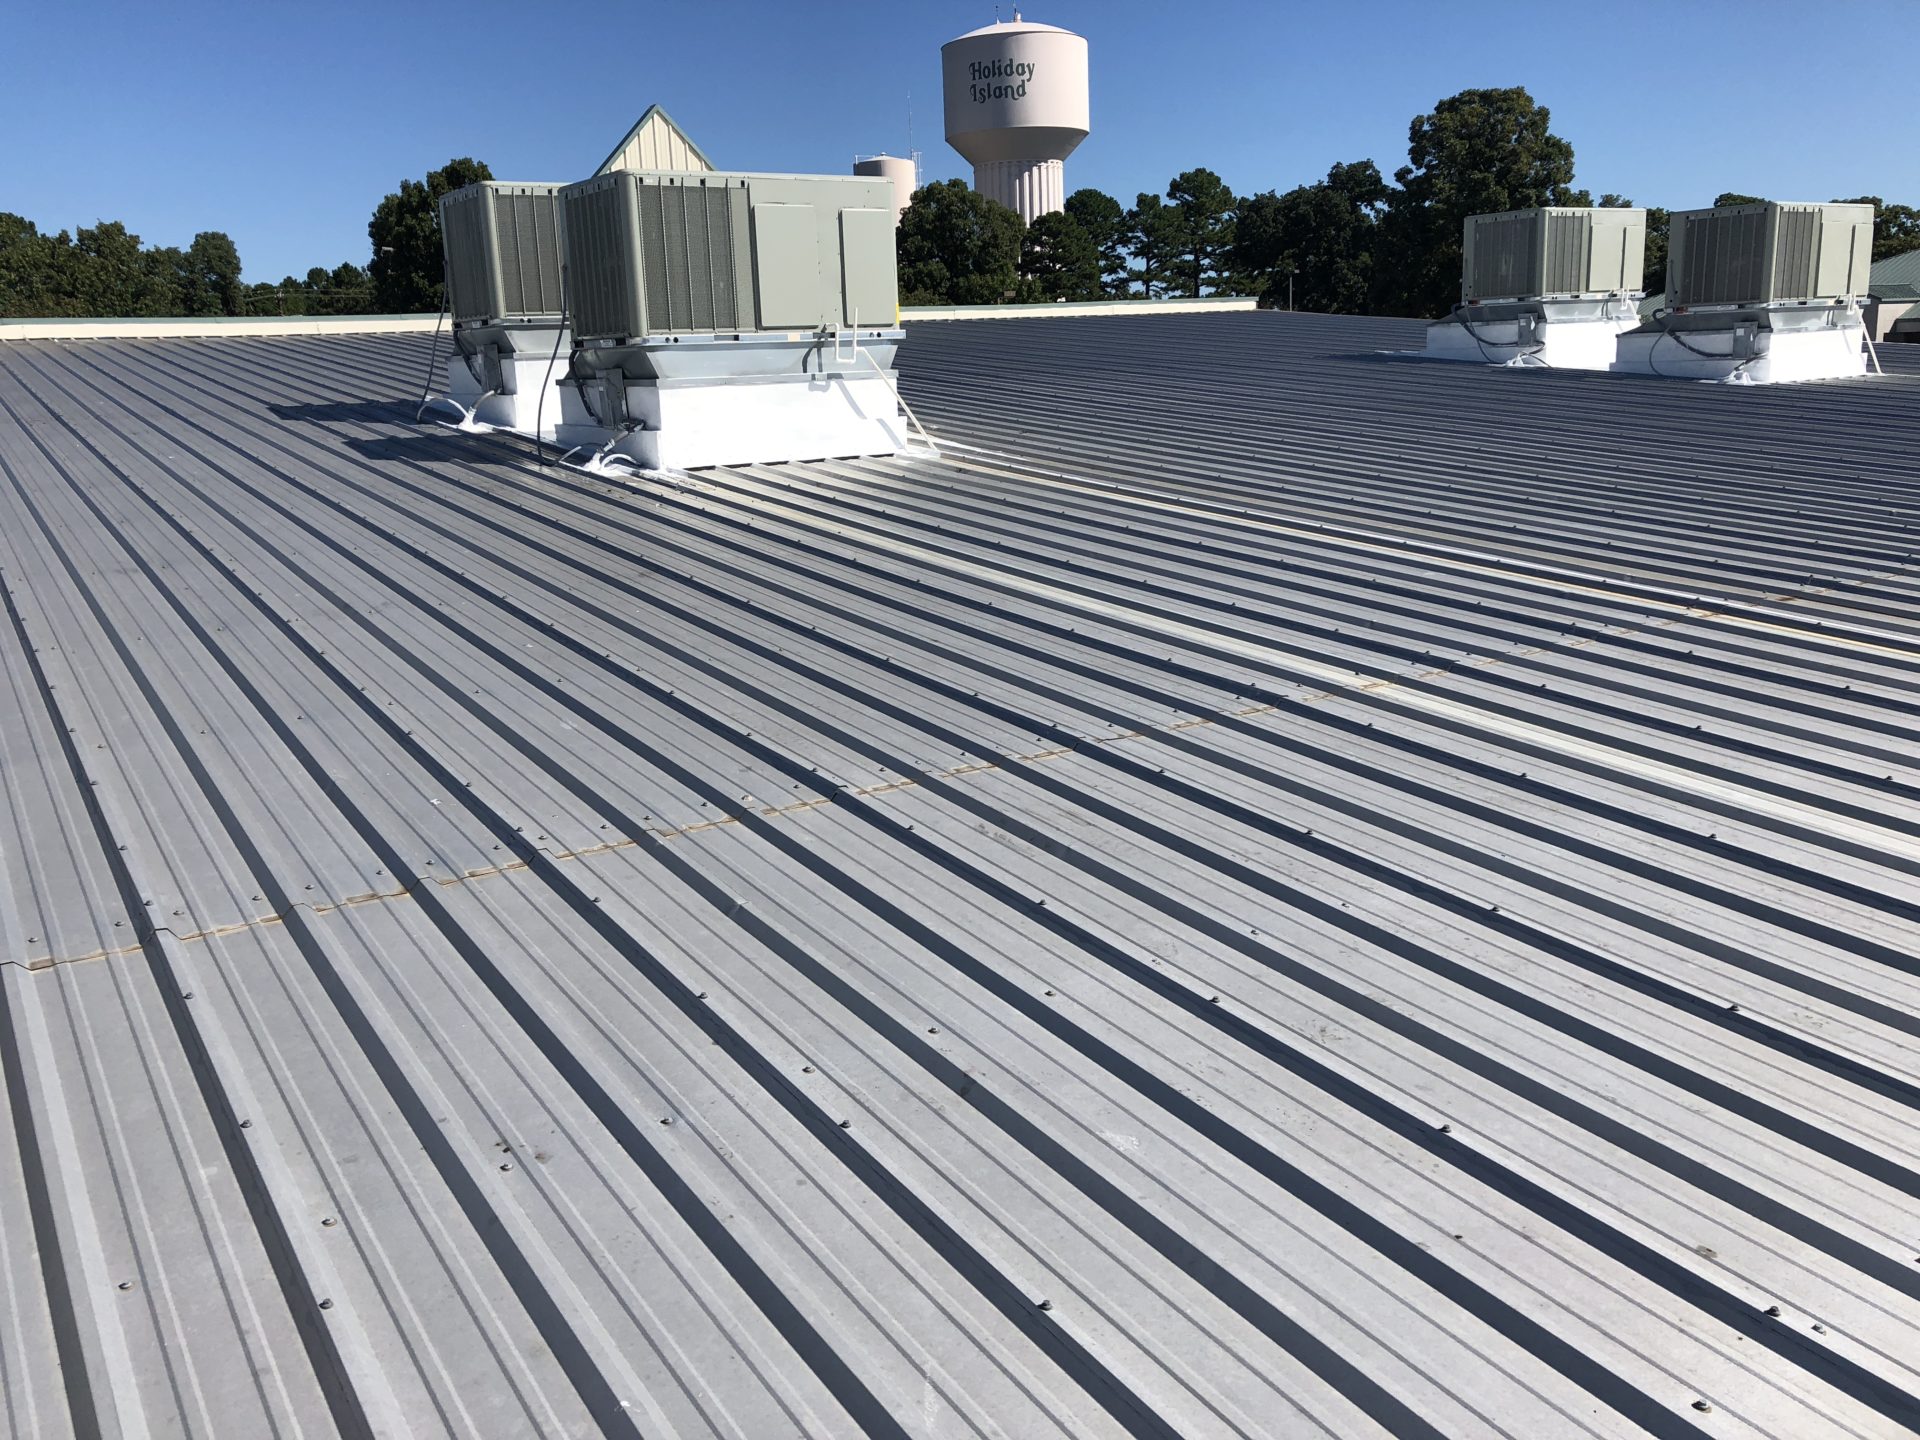 This Picture From GM Systems A Commercial Roofing Service Roofer In Kansas, MO. | Contact GM Systems Soon For The Most Awesome Commercial Roofing Services In Kansas, Missouri.}